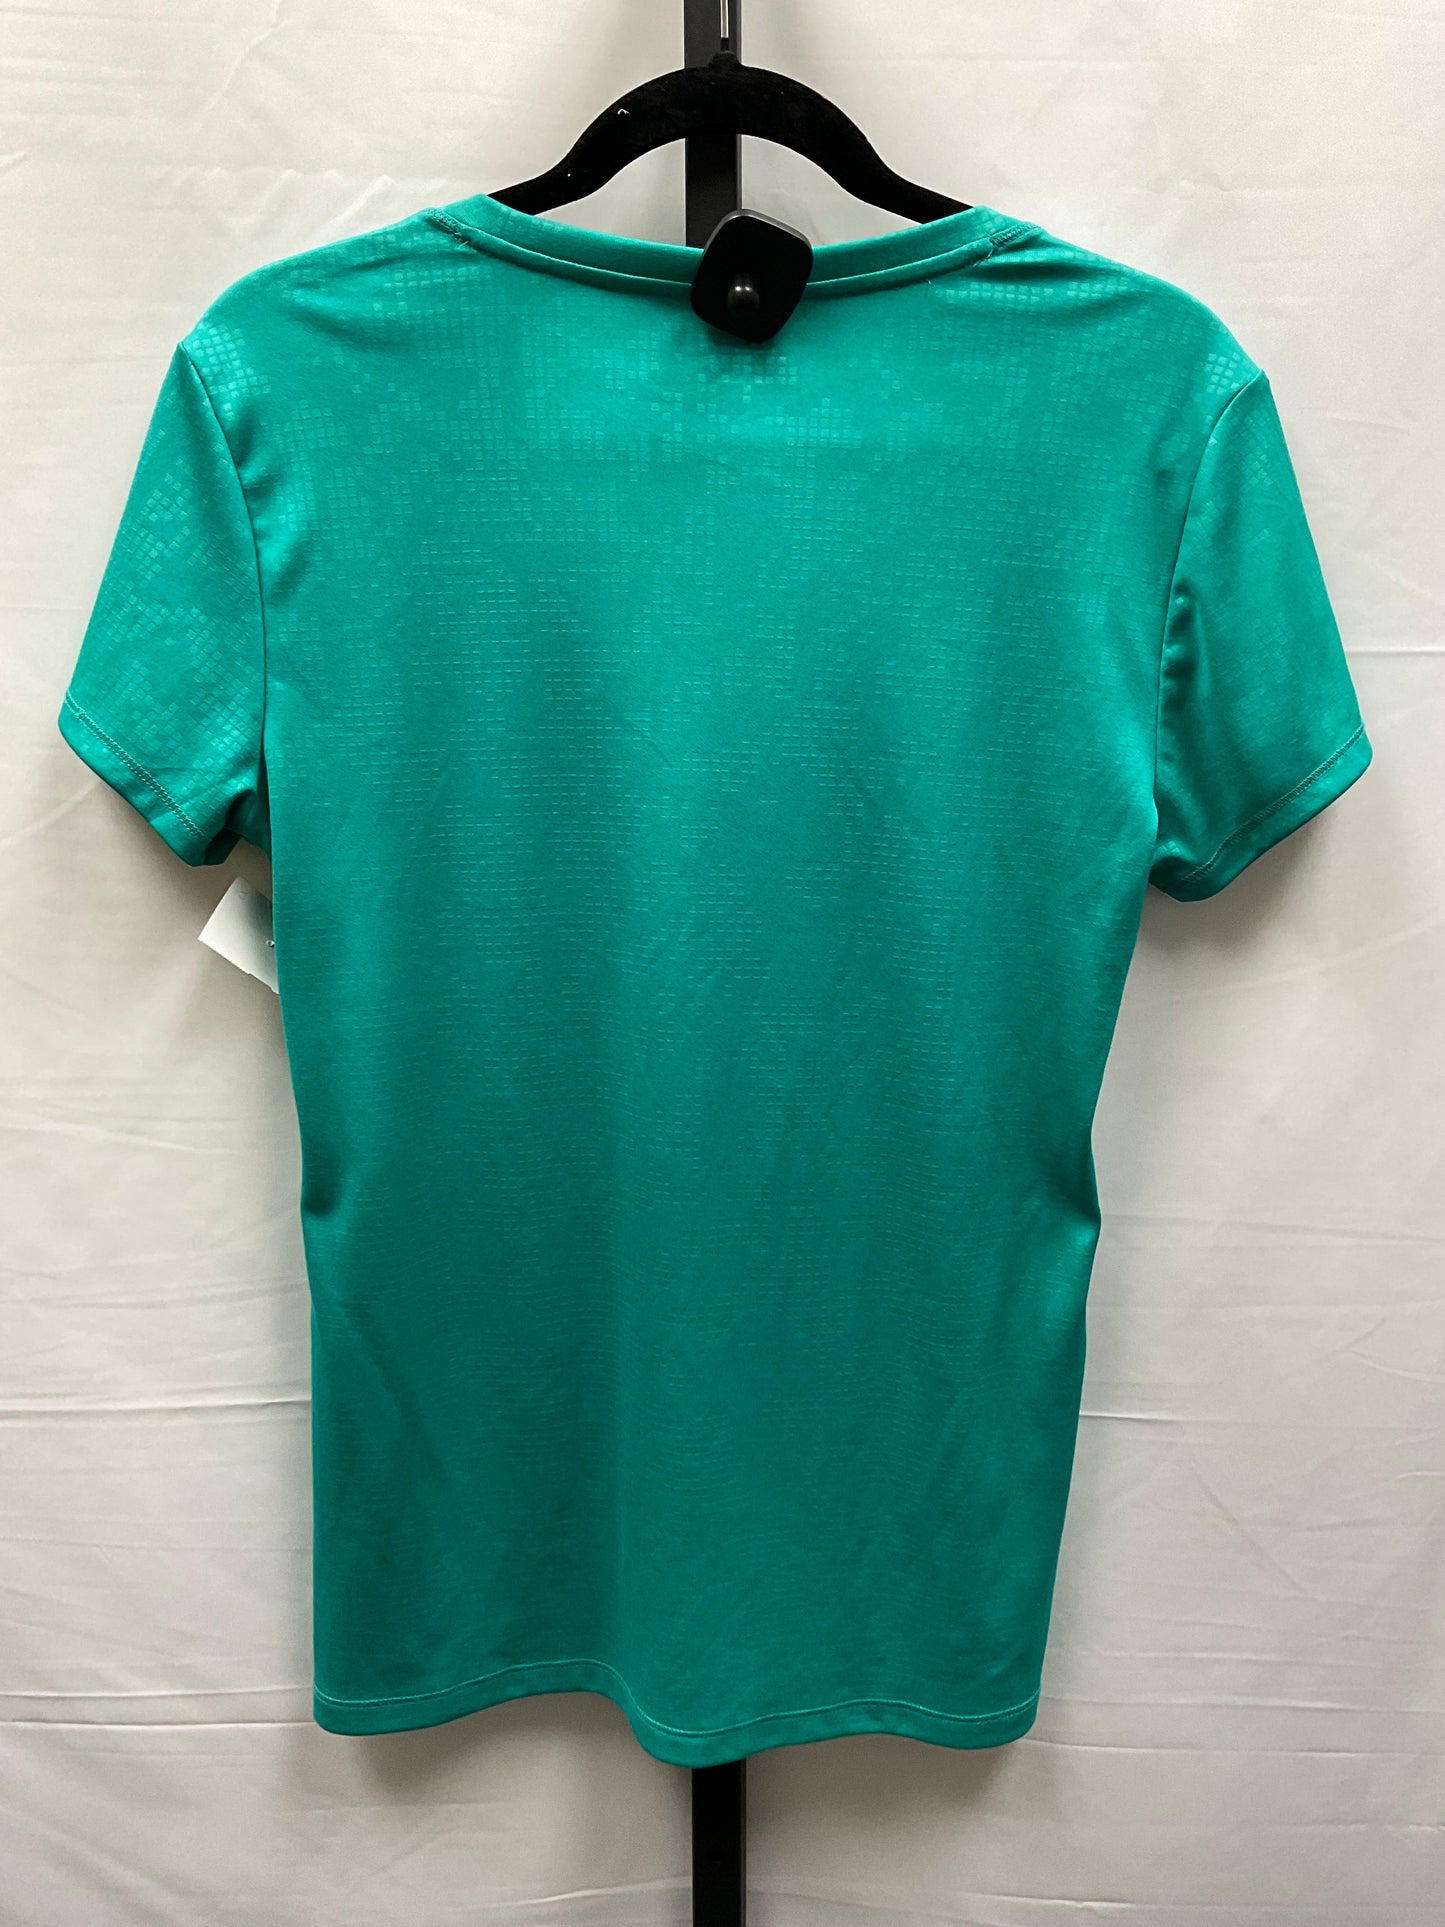 Blue Athletic Top Short Sleeve Bcg, Size M